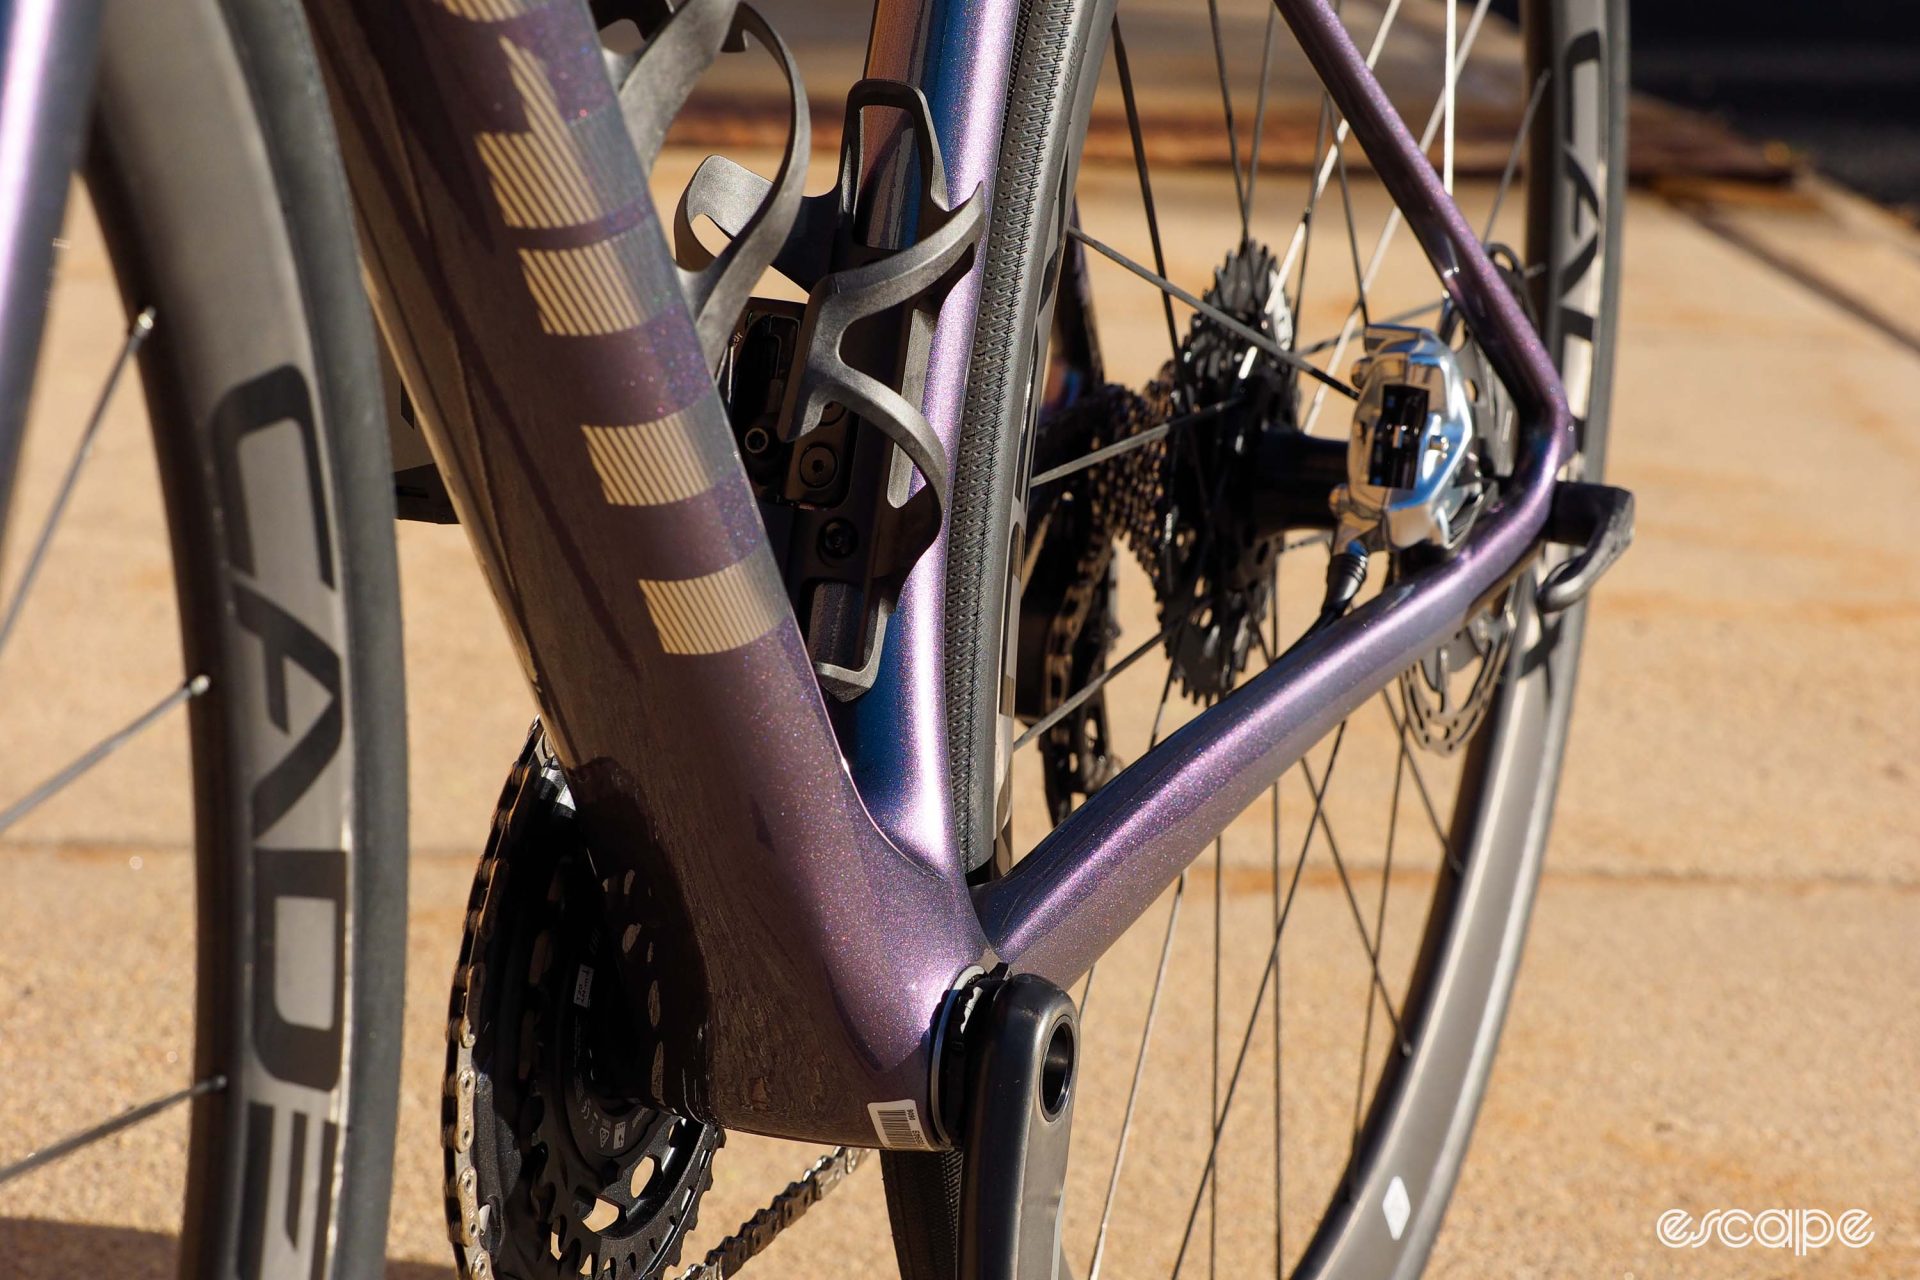 The bottom bracket area and rear triangle shown from the front, to accentuate Giant's flowing industrial design that includes hardly any abrupt transitions between tubes.